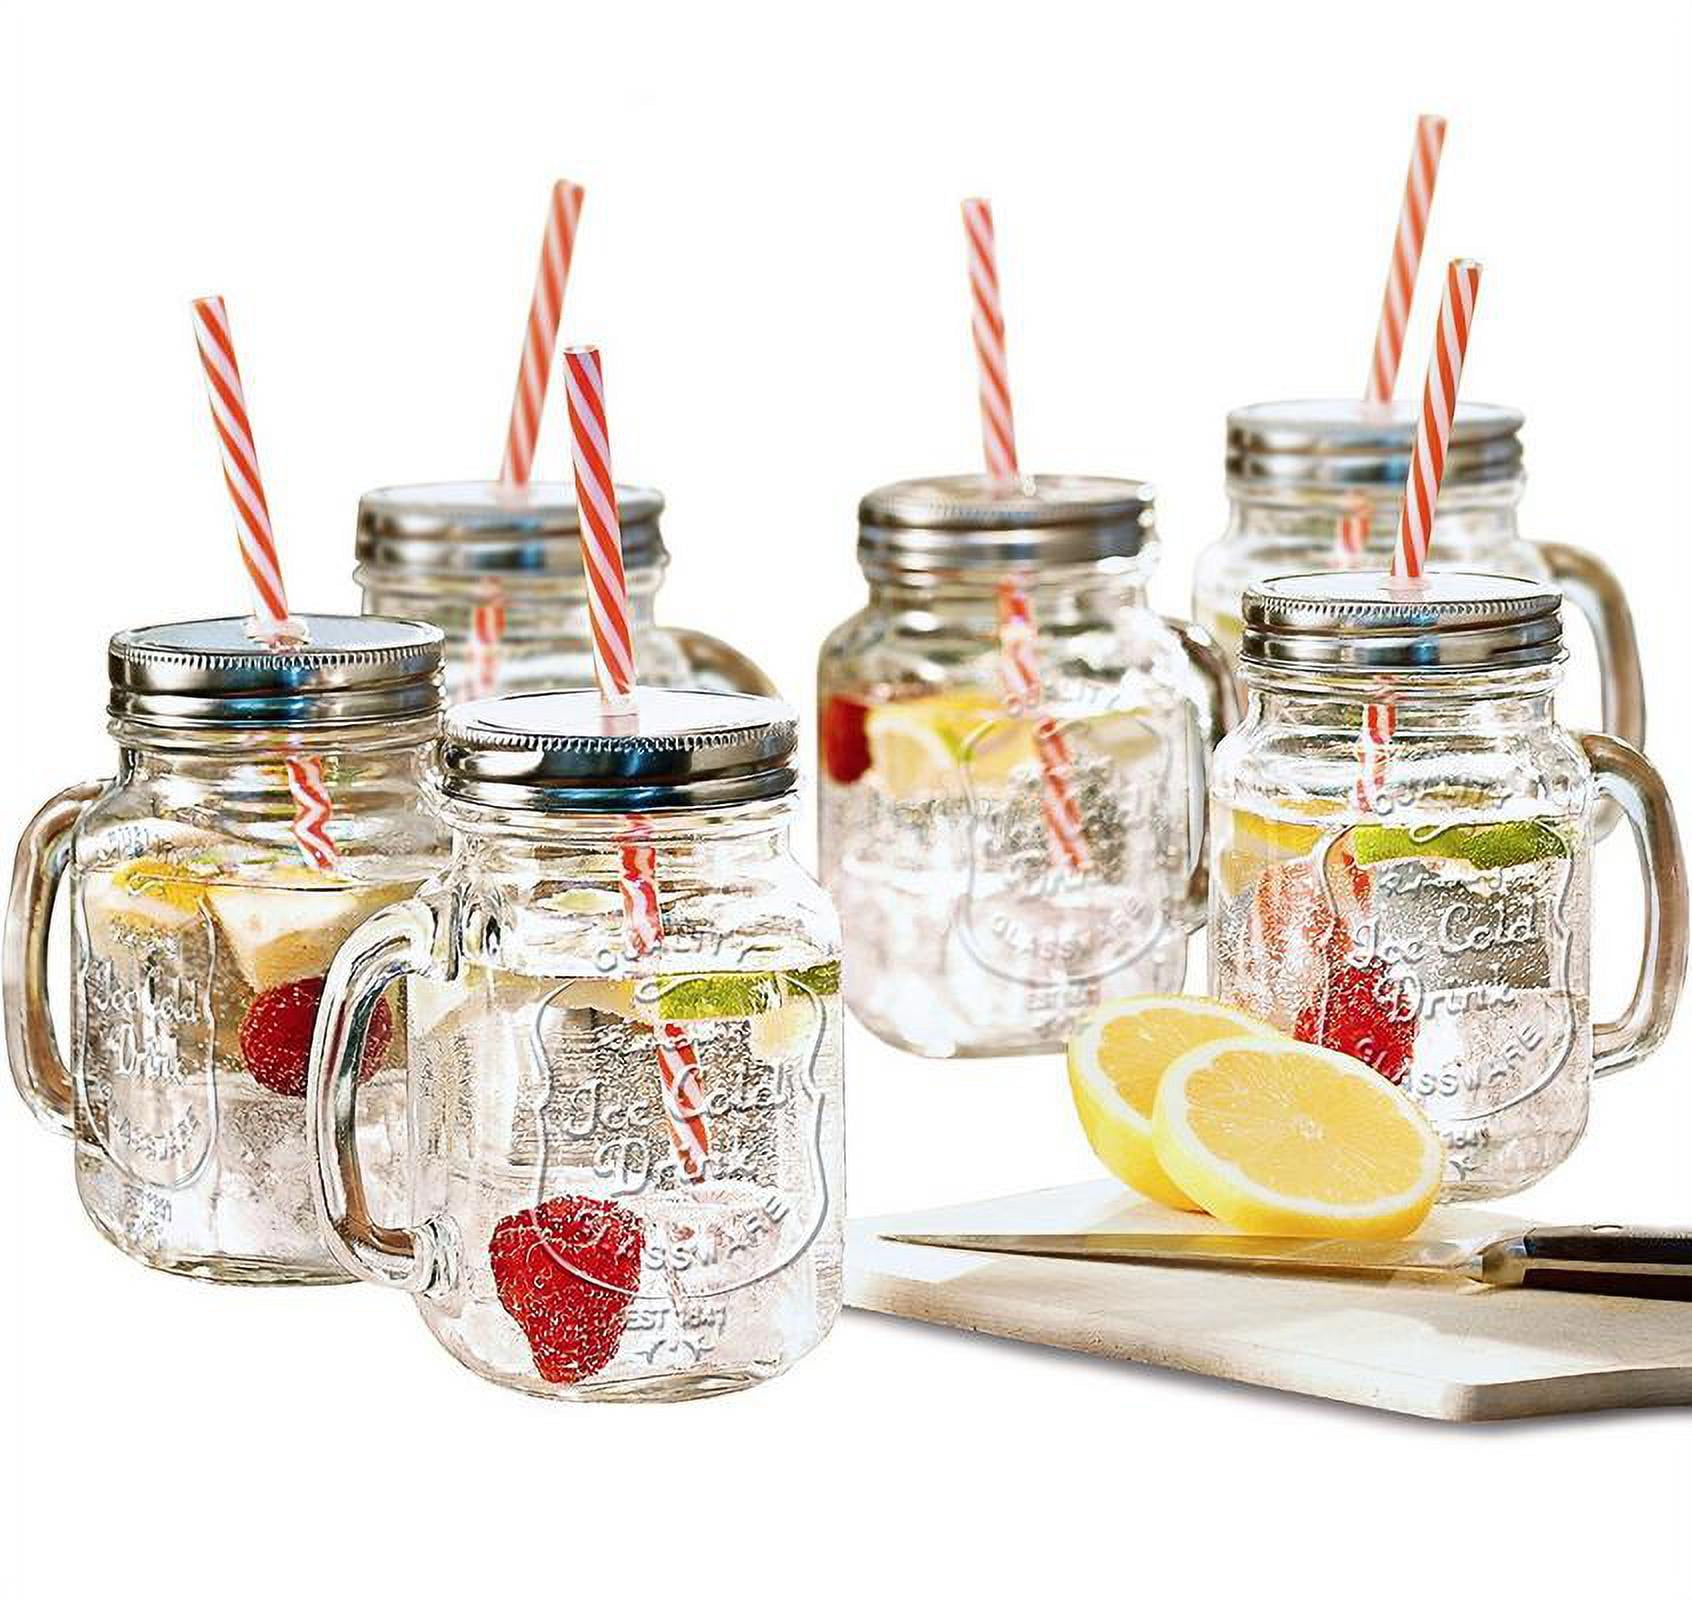 Home Suave Mason Jar Mugs with Handle, Regular Mouth Colorful Lids Silver